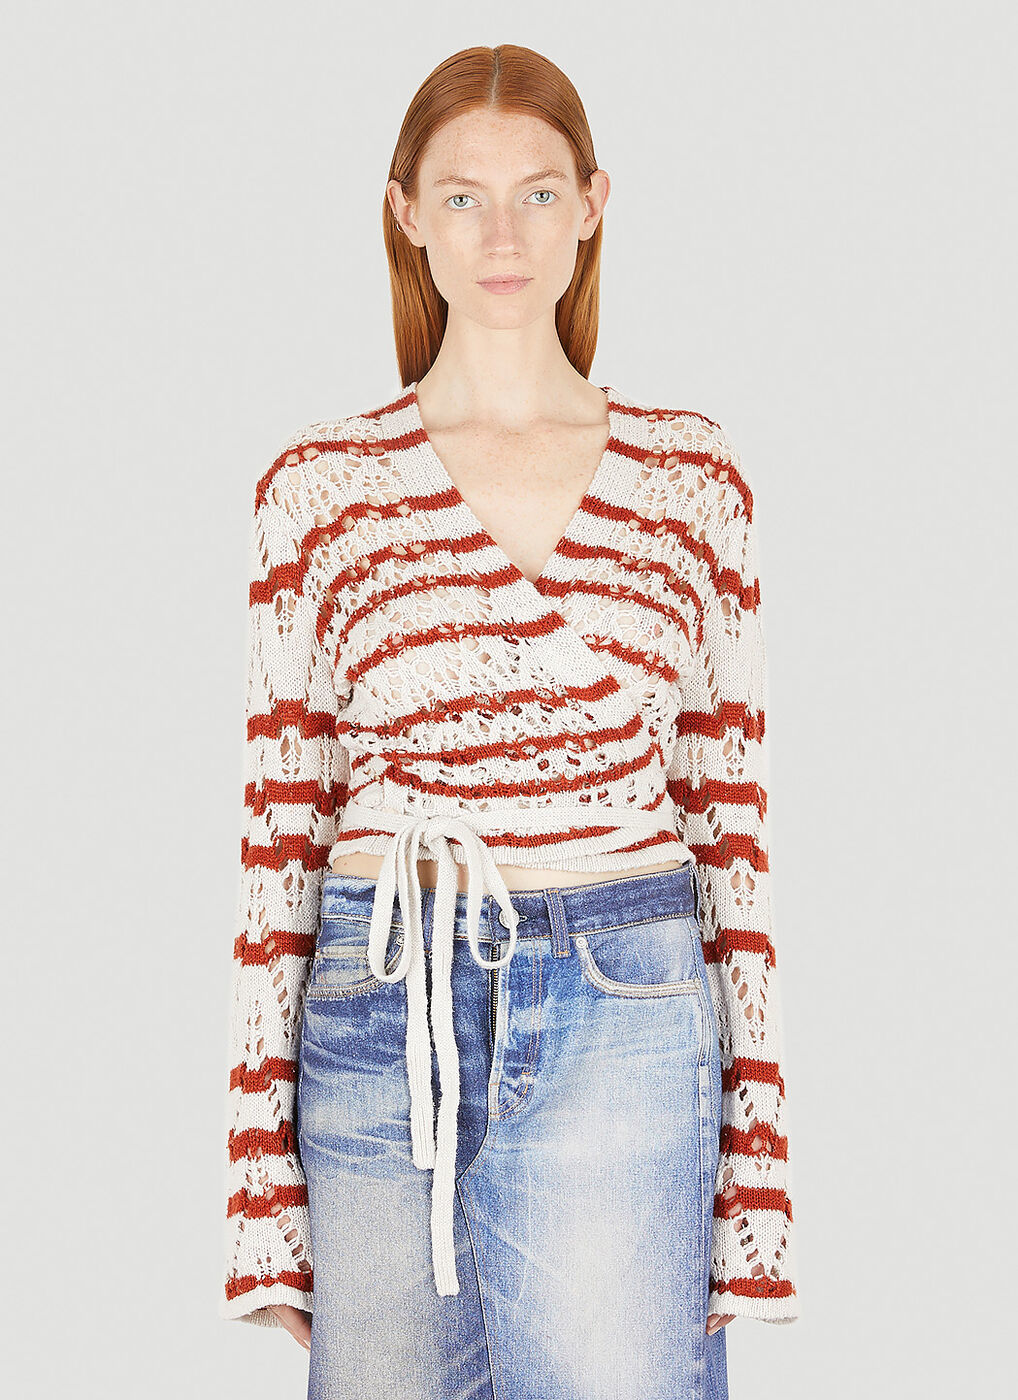 Rook Smash oplichter Zig Zag Wrap Knit Top in Red Our Legacy